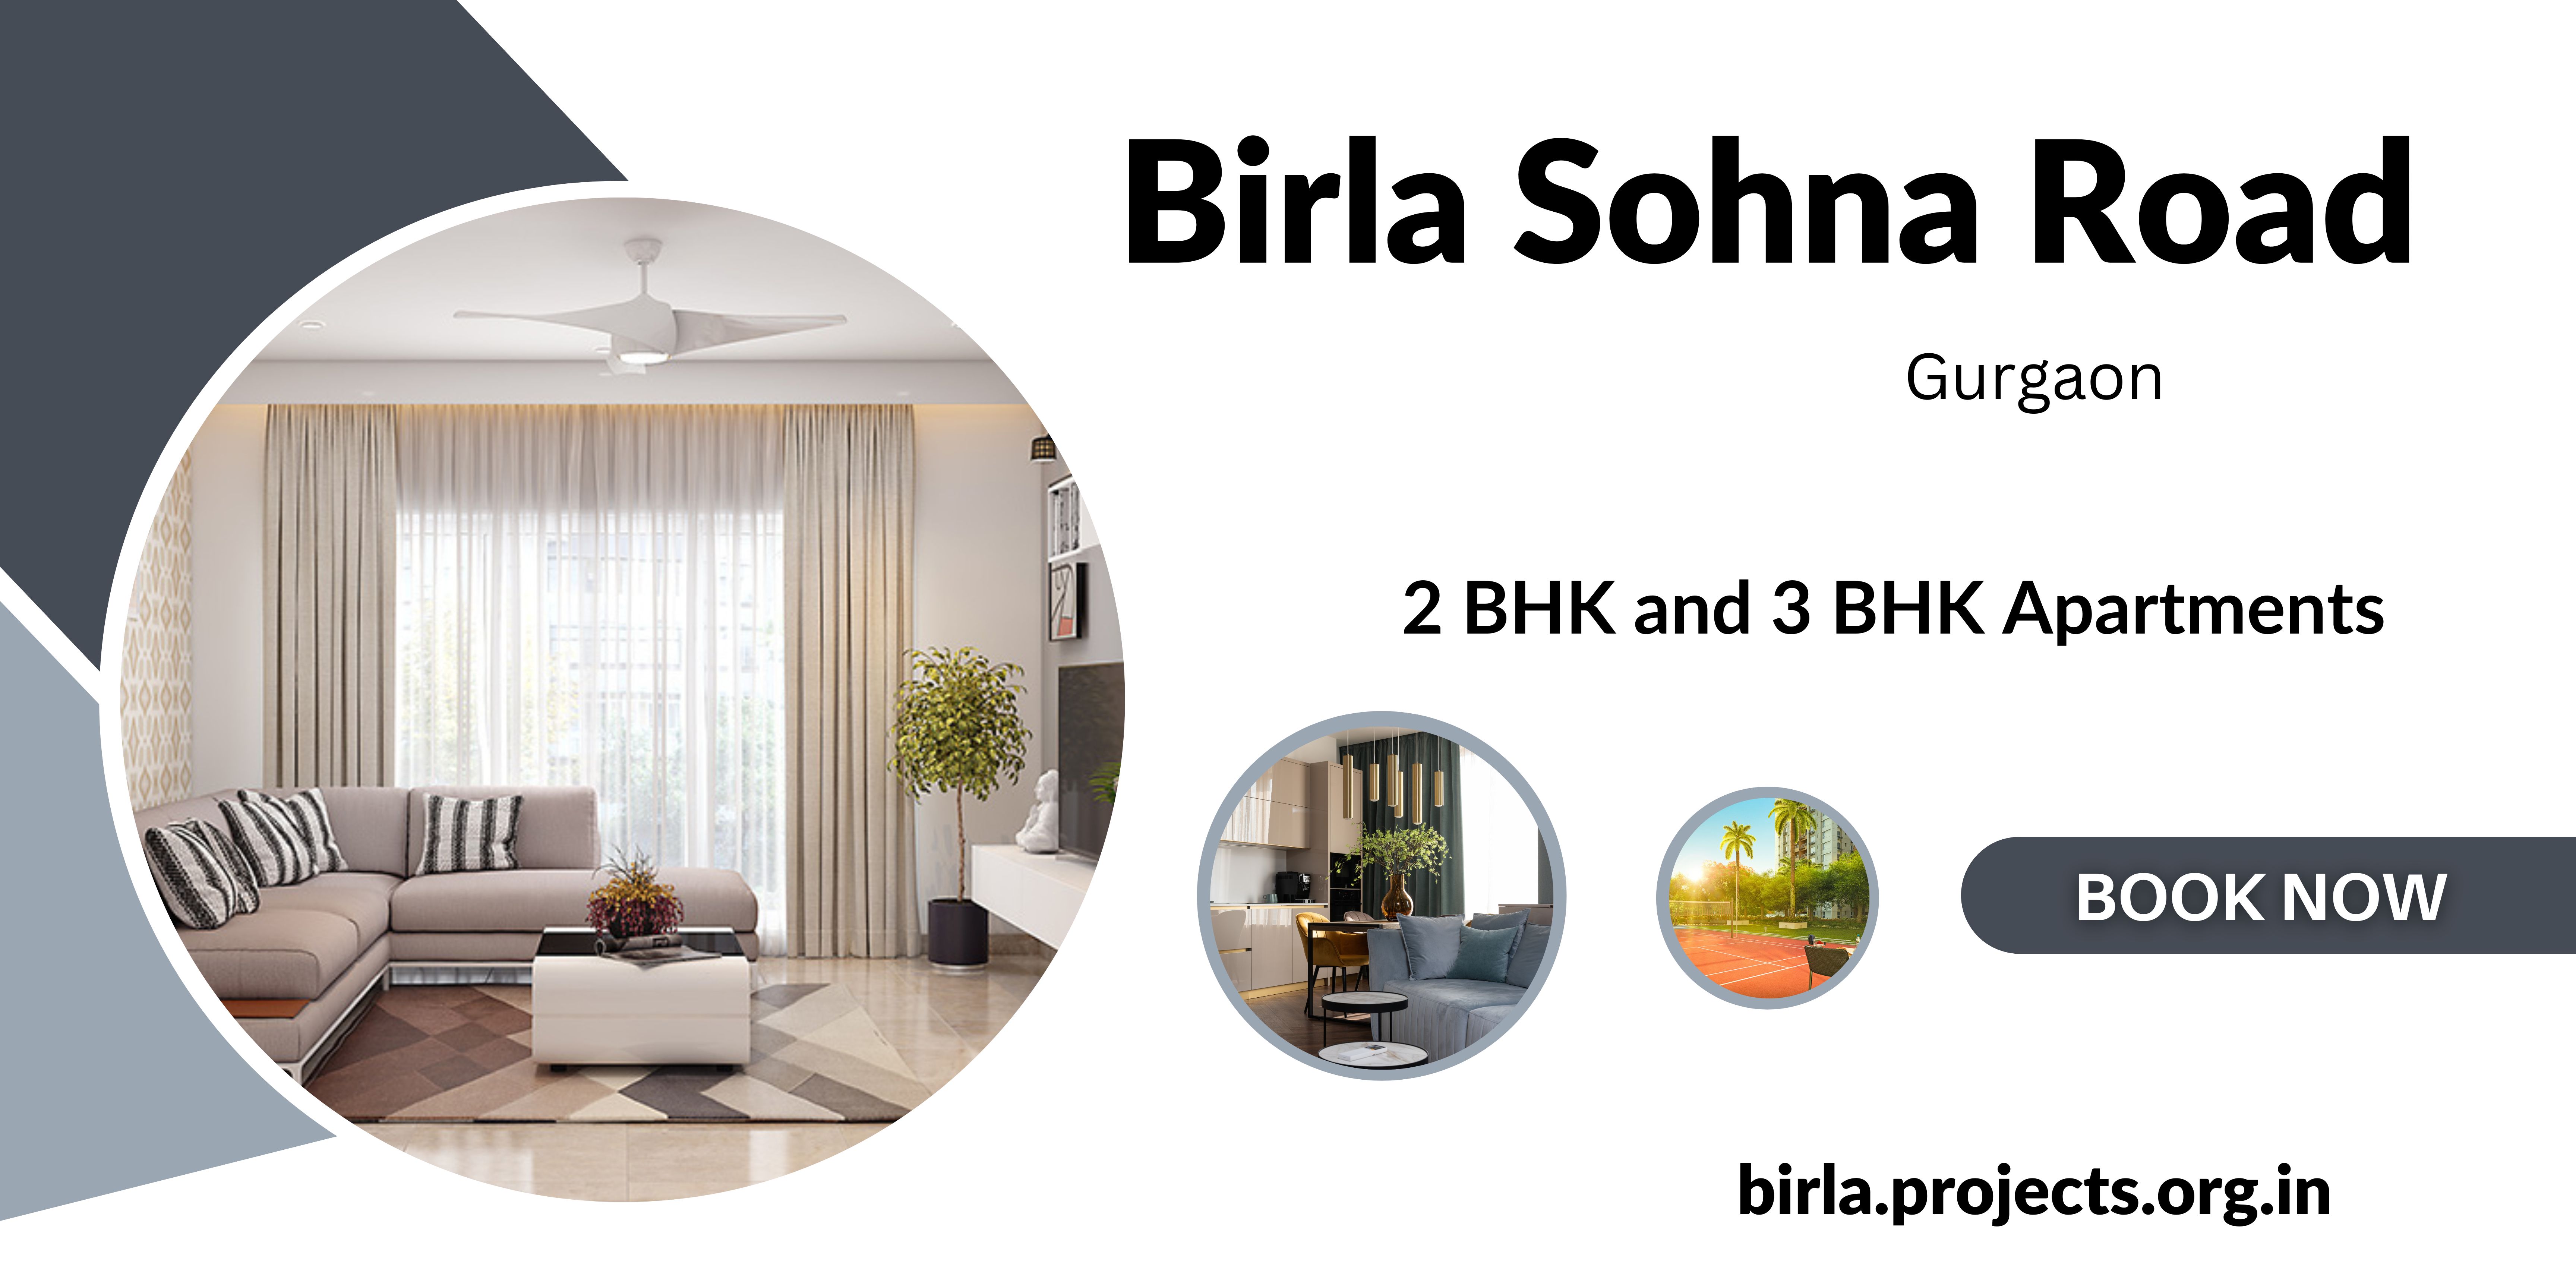 Birla Sohna Road Gurugram - If You Ever Believed In The Beauty Of Your Dreams